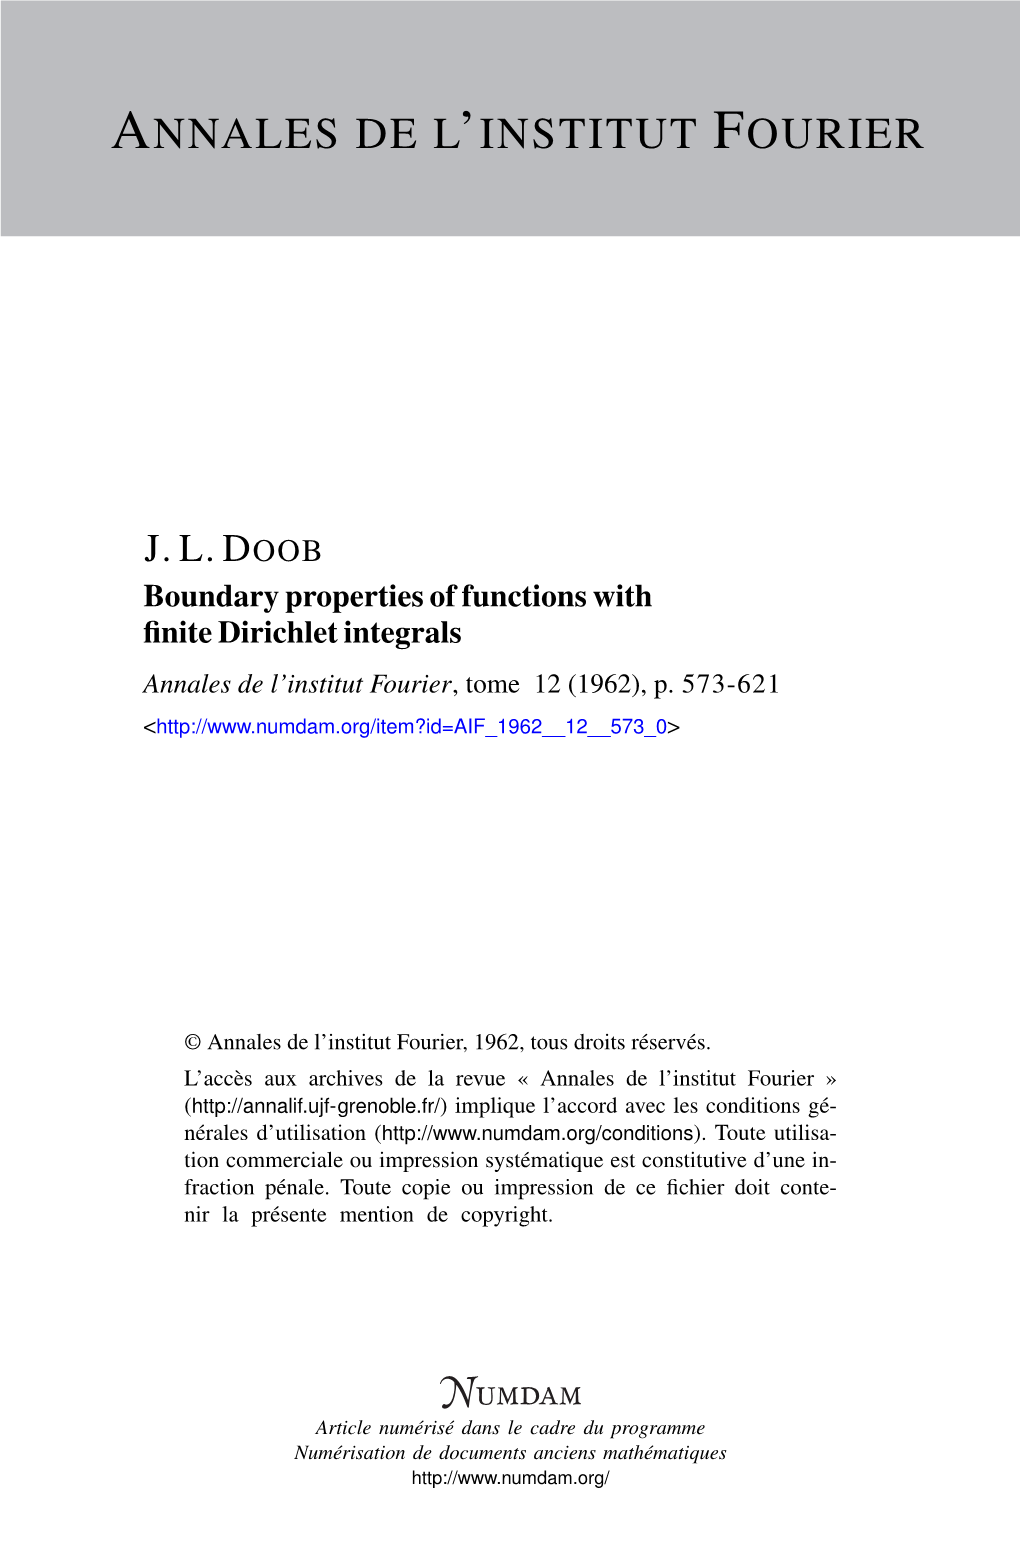 BOUNDARY PROPERTIES of FUNCTIONS with FINITE DIRICHLET INTEGRALS by J